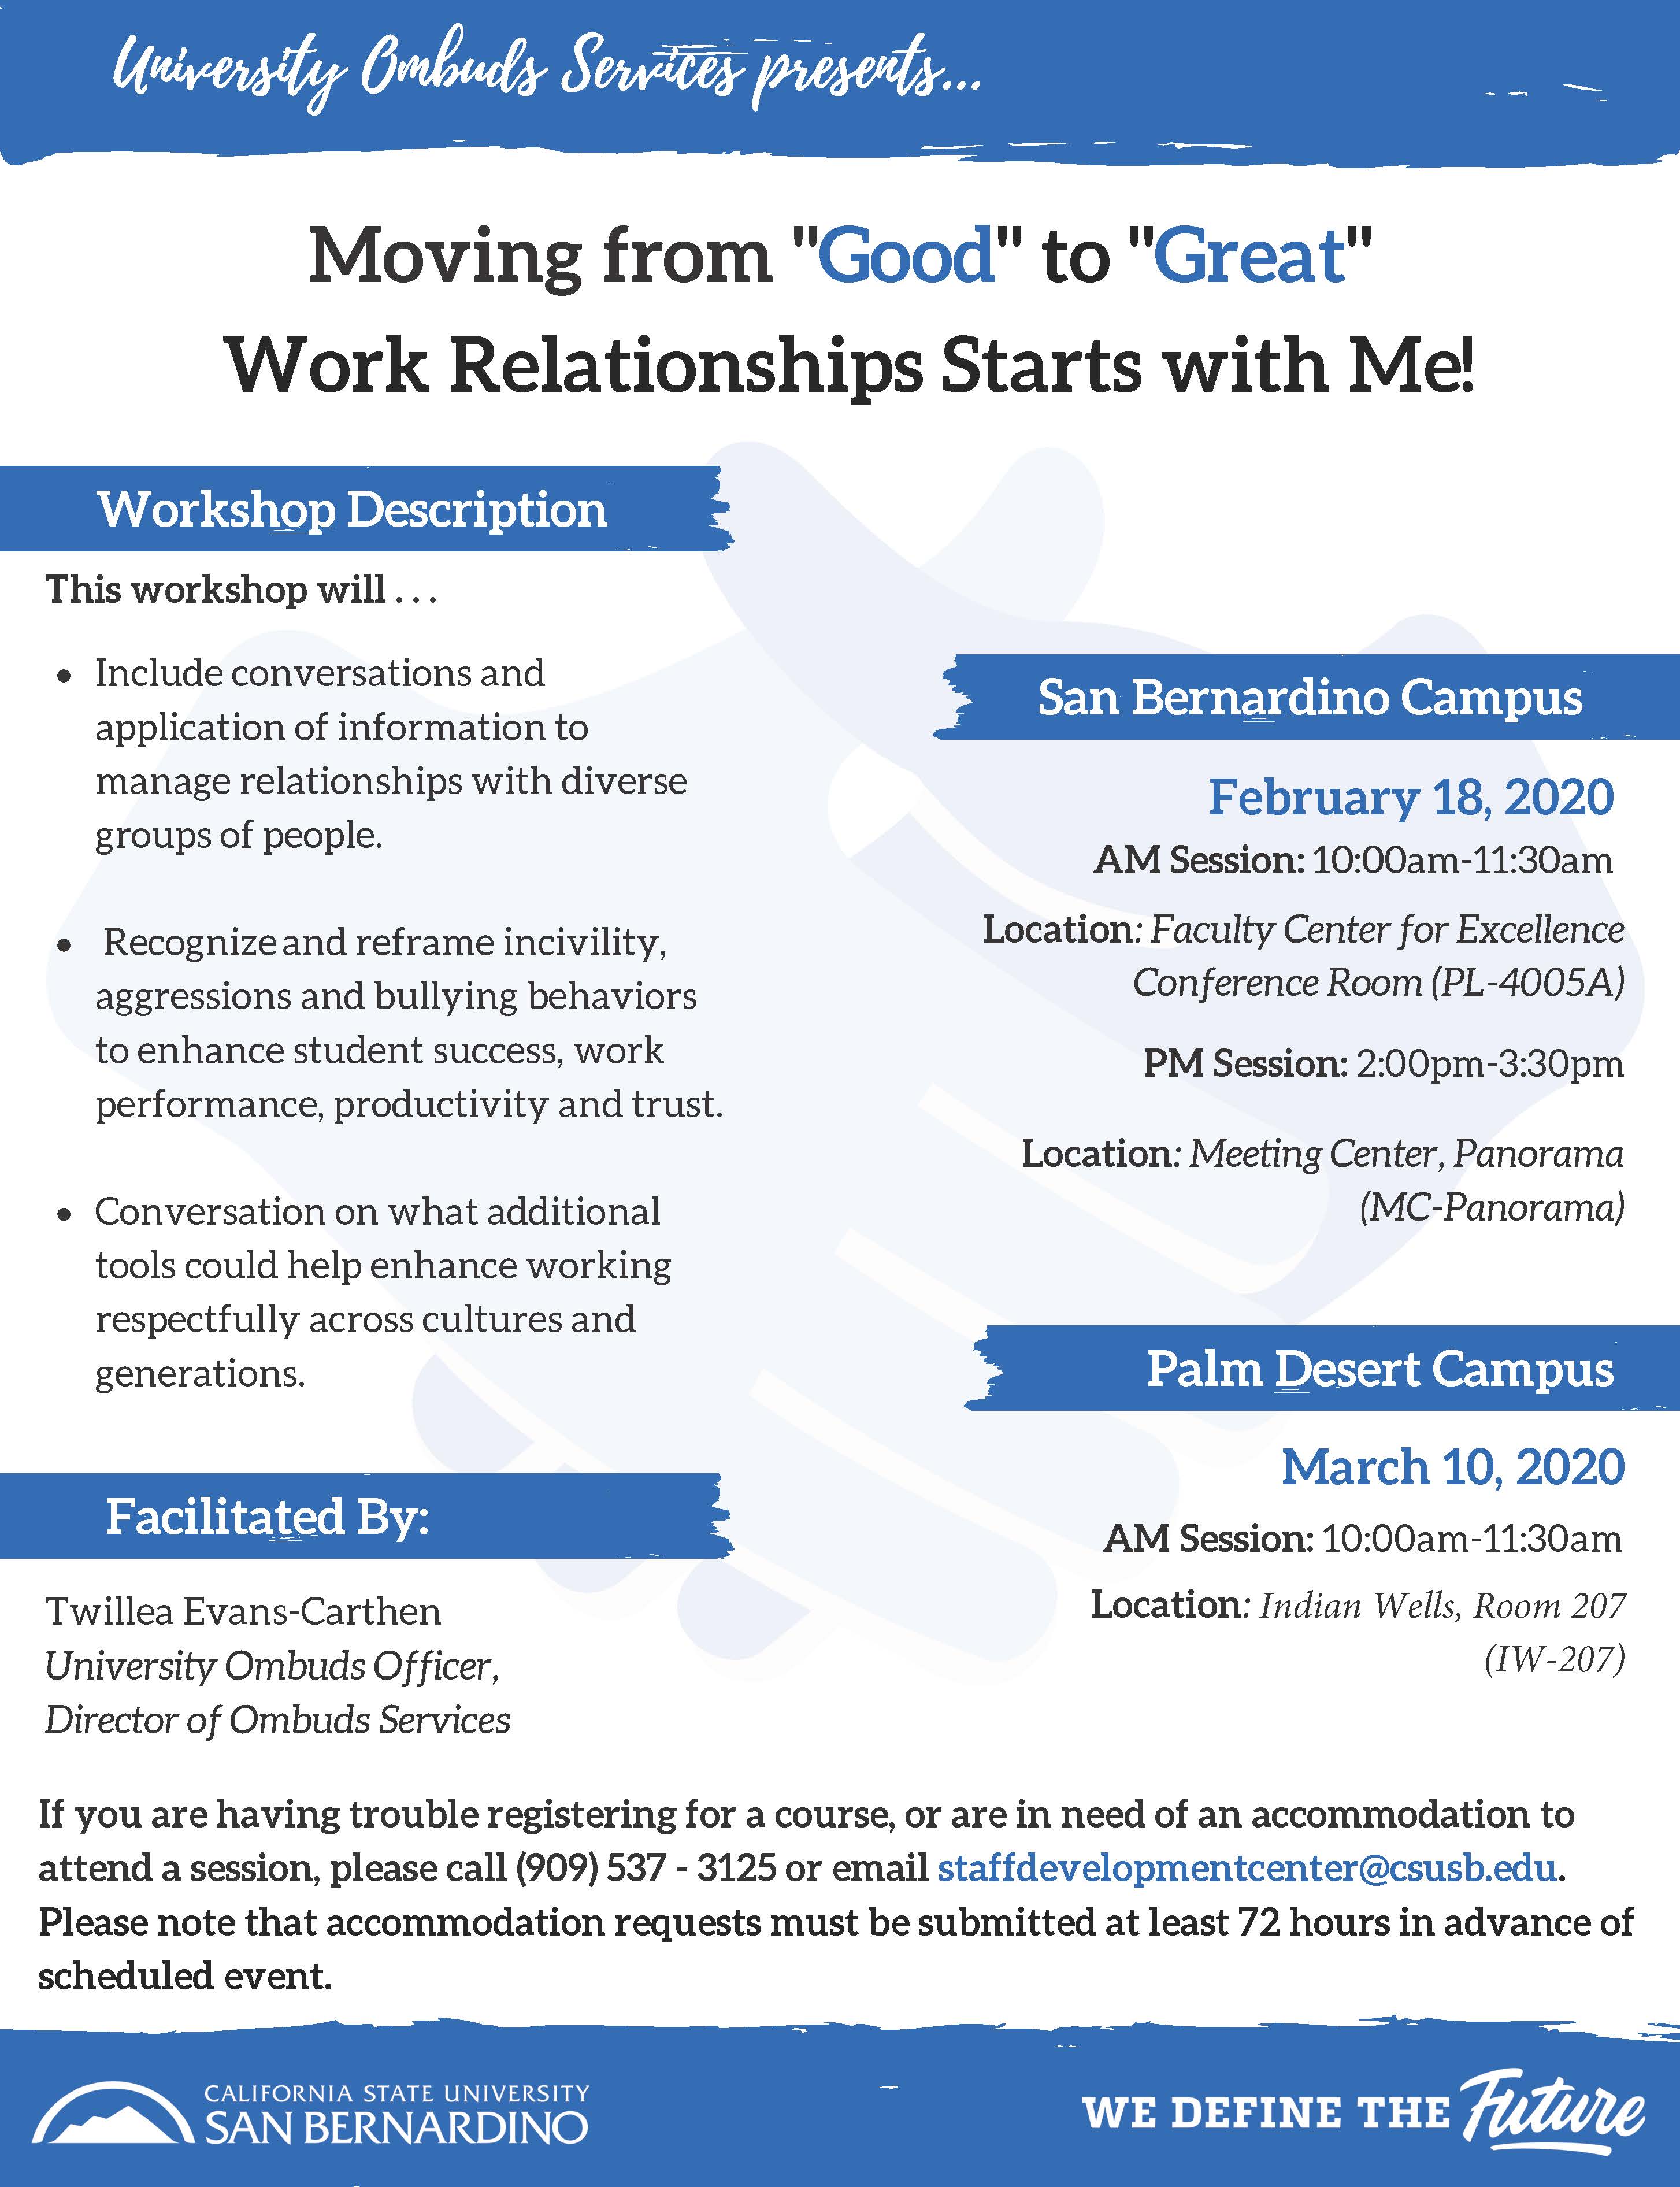 Workshop: Moving from "Good to Great" Work Relationships Starts with Me!